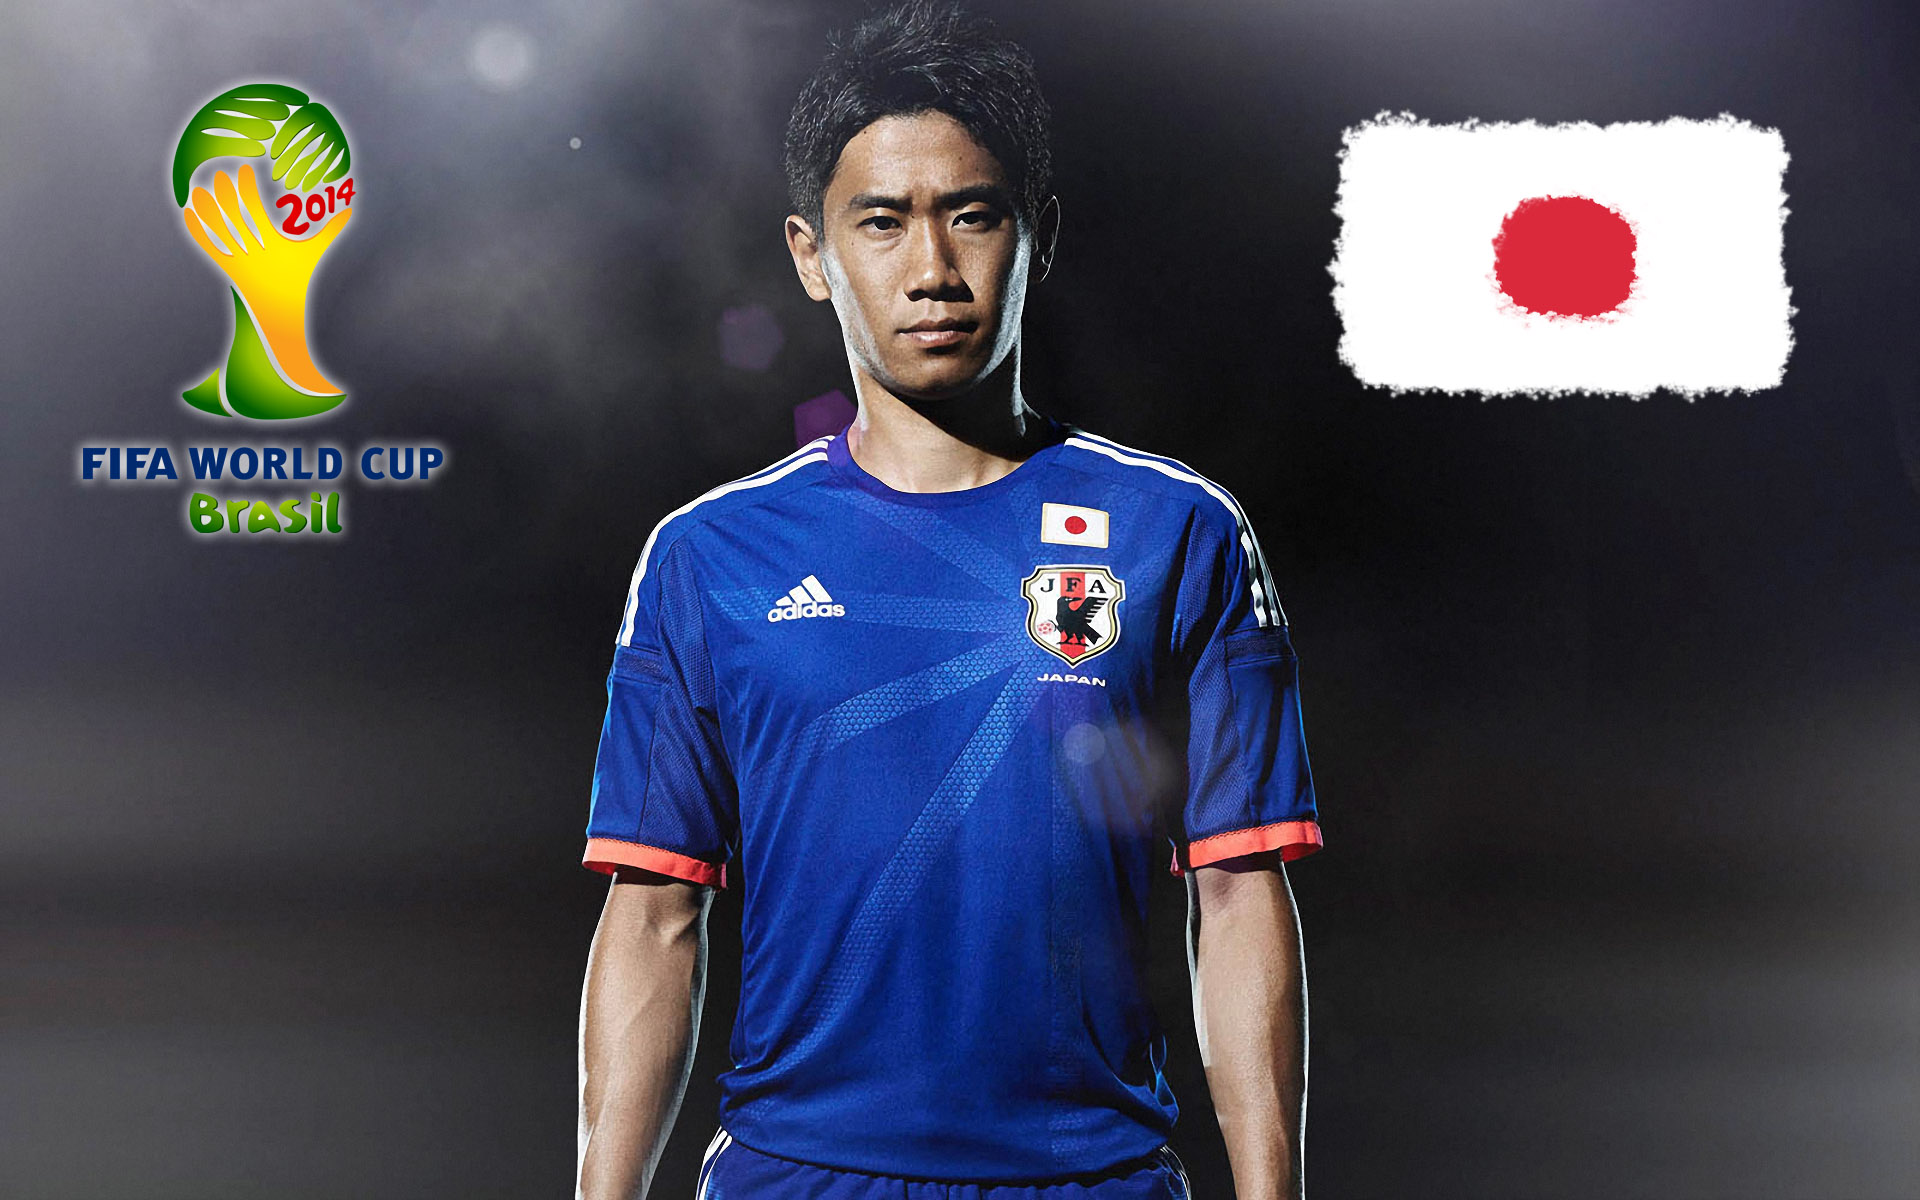 Group C Japan – 2014 World Cup